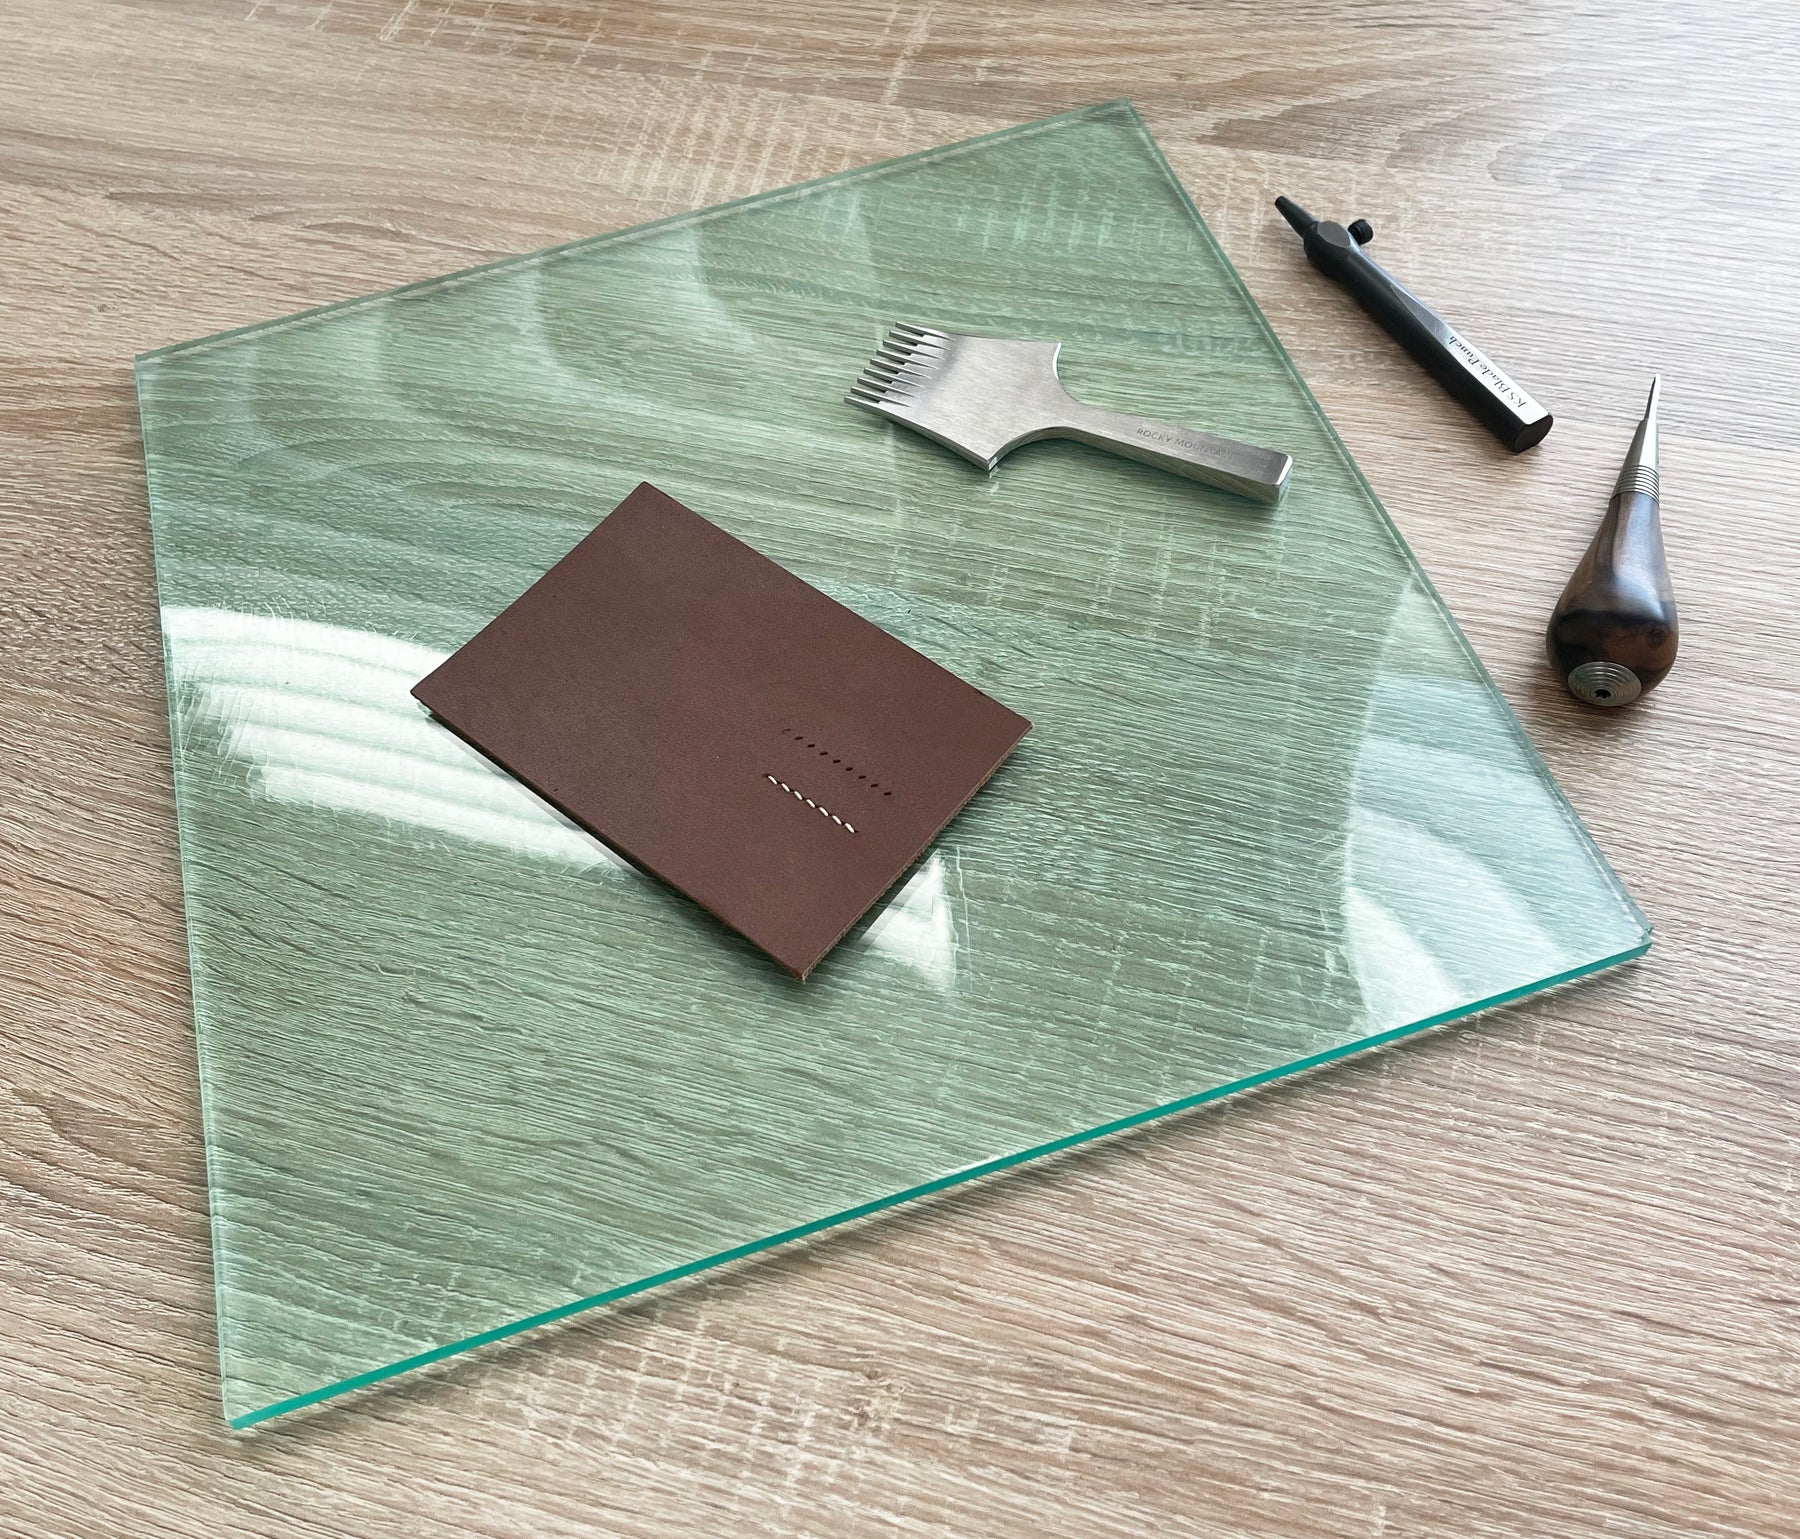 Leather Cutting Mat, Board Craft Punching Pad White Leather Stamping Board  For Drilling Punches 